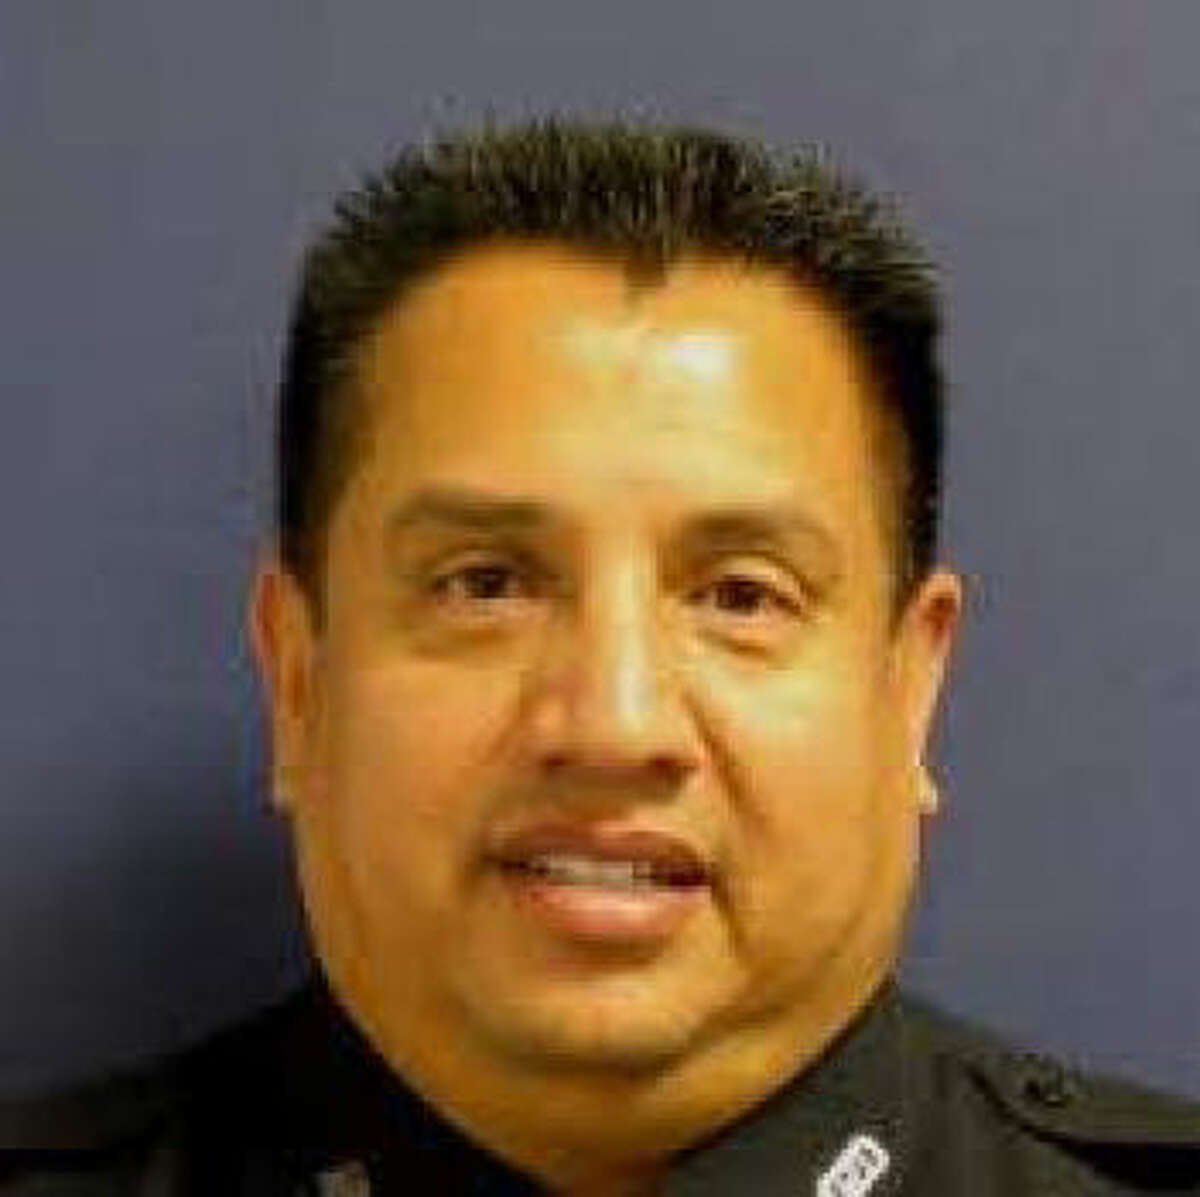 Accused senior police officerHouston Police Officer Noe Juarez is charged with having a role in a drug-trafficking pipeline from Mexico to Houston and on to Louisiana. He is accused of helping traffickers get guns and cars as well as selling them classified police information. His lawyer contends the federal government's case is built on the words of criminals who stand to gain from lying.